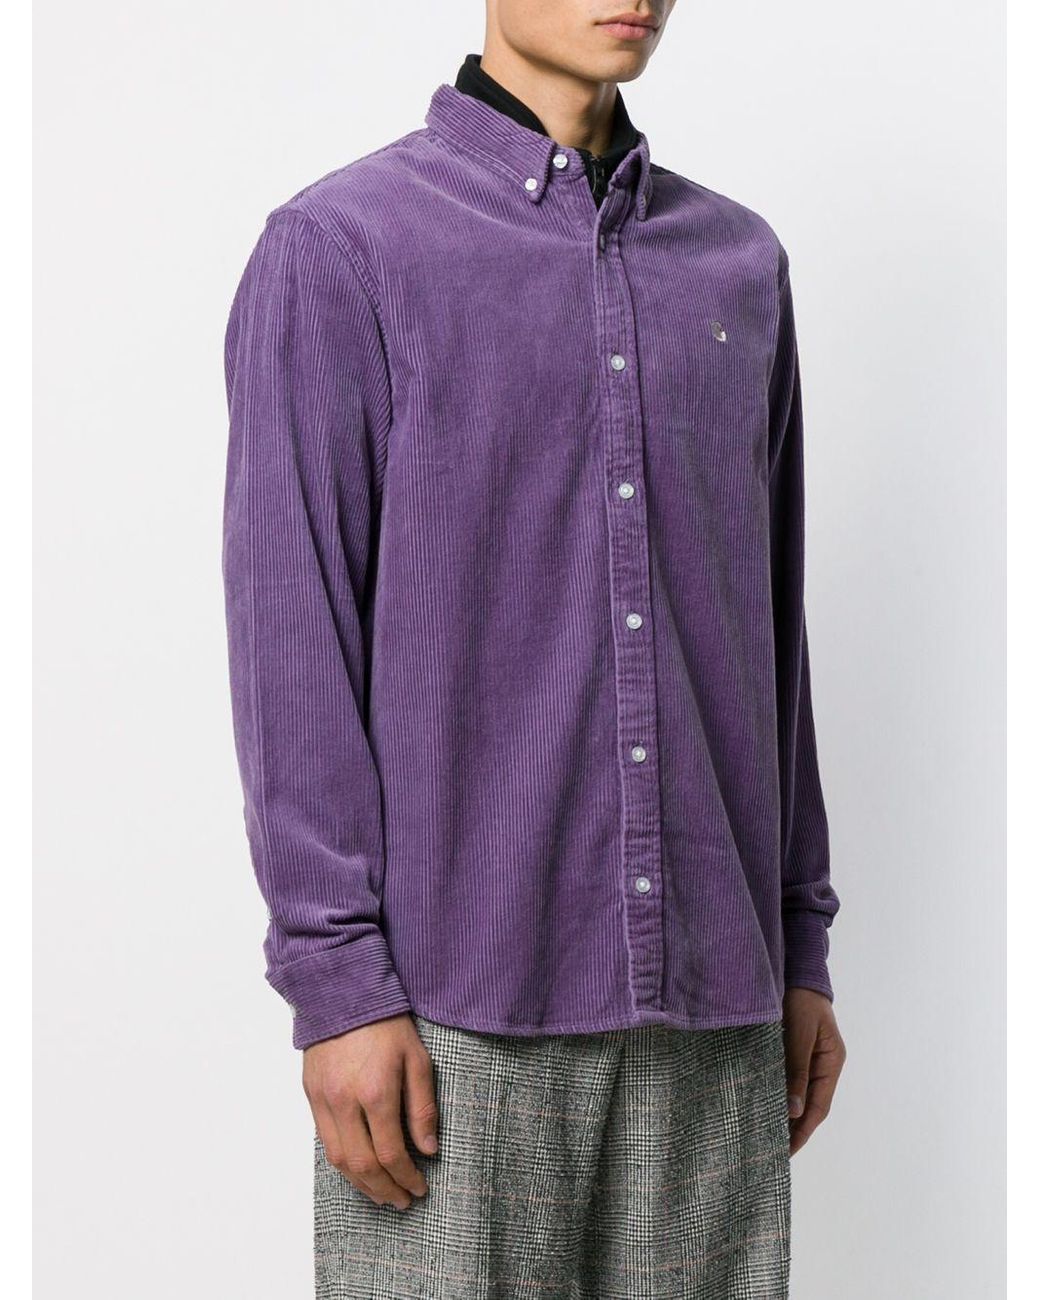 Carhartt WIP Cotton Madison Cord Shirt in Purple for Men | Lyst